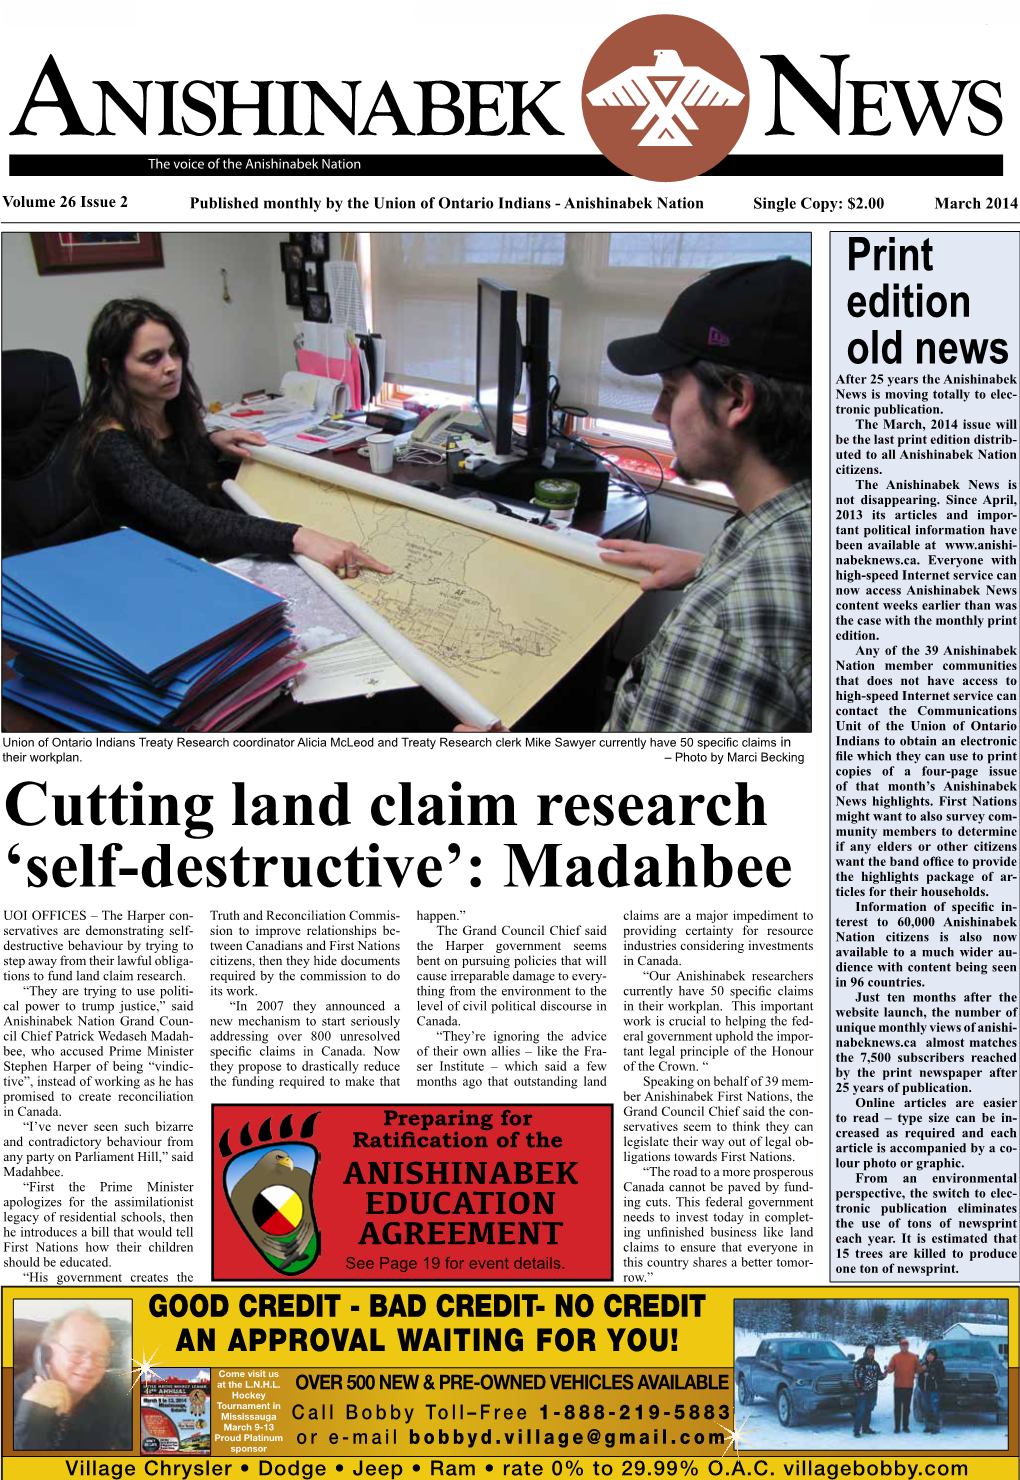 March 2014 Print Edition Old News After 25 Years the Anishinabek News Is Moving Totally to Elec- Tronic Publication